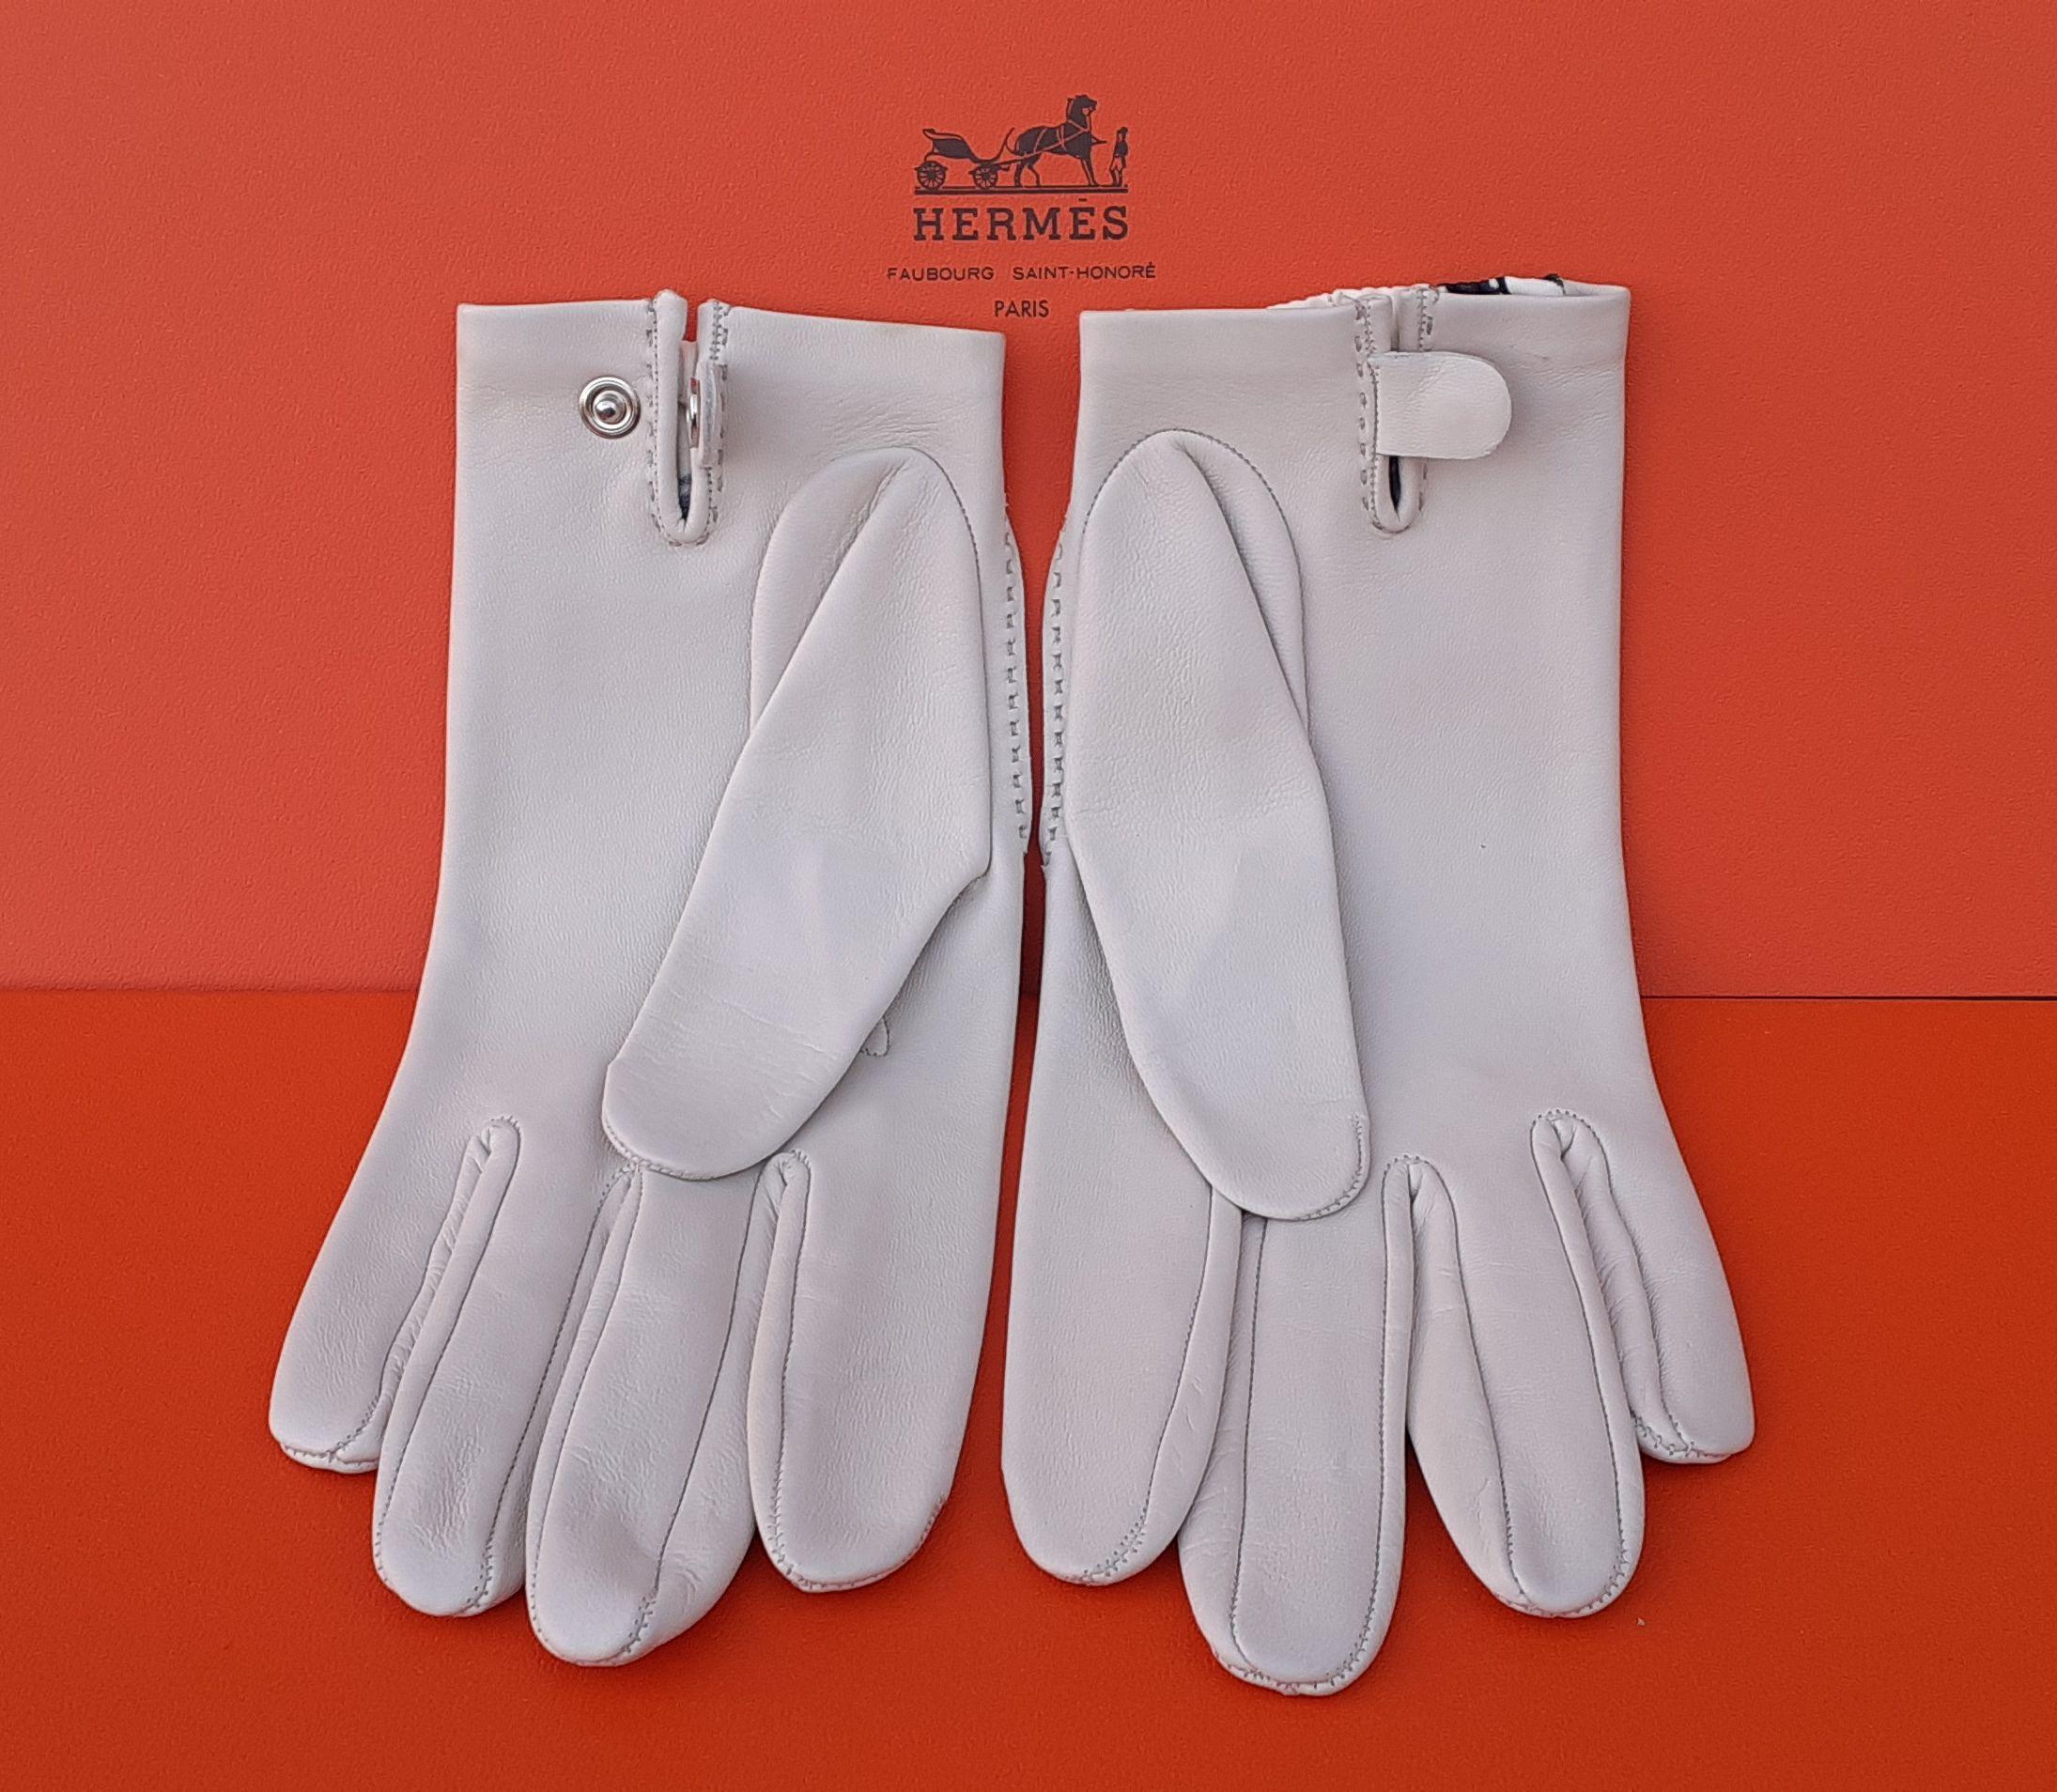 Beautiful Hermès Leather Gloves Ribbon Printed White and Black Size 7 For Sale 2